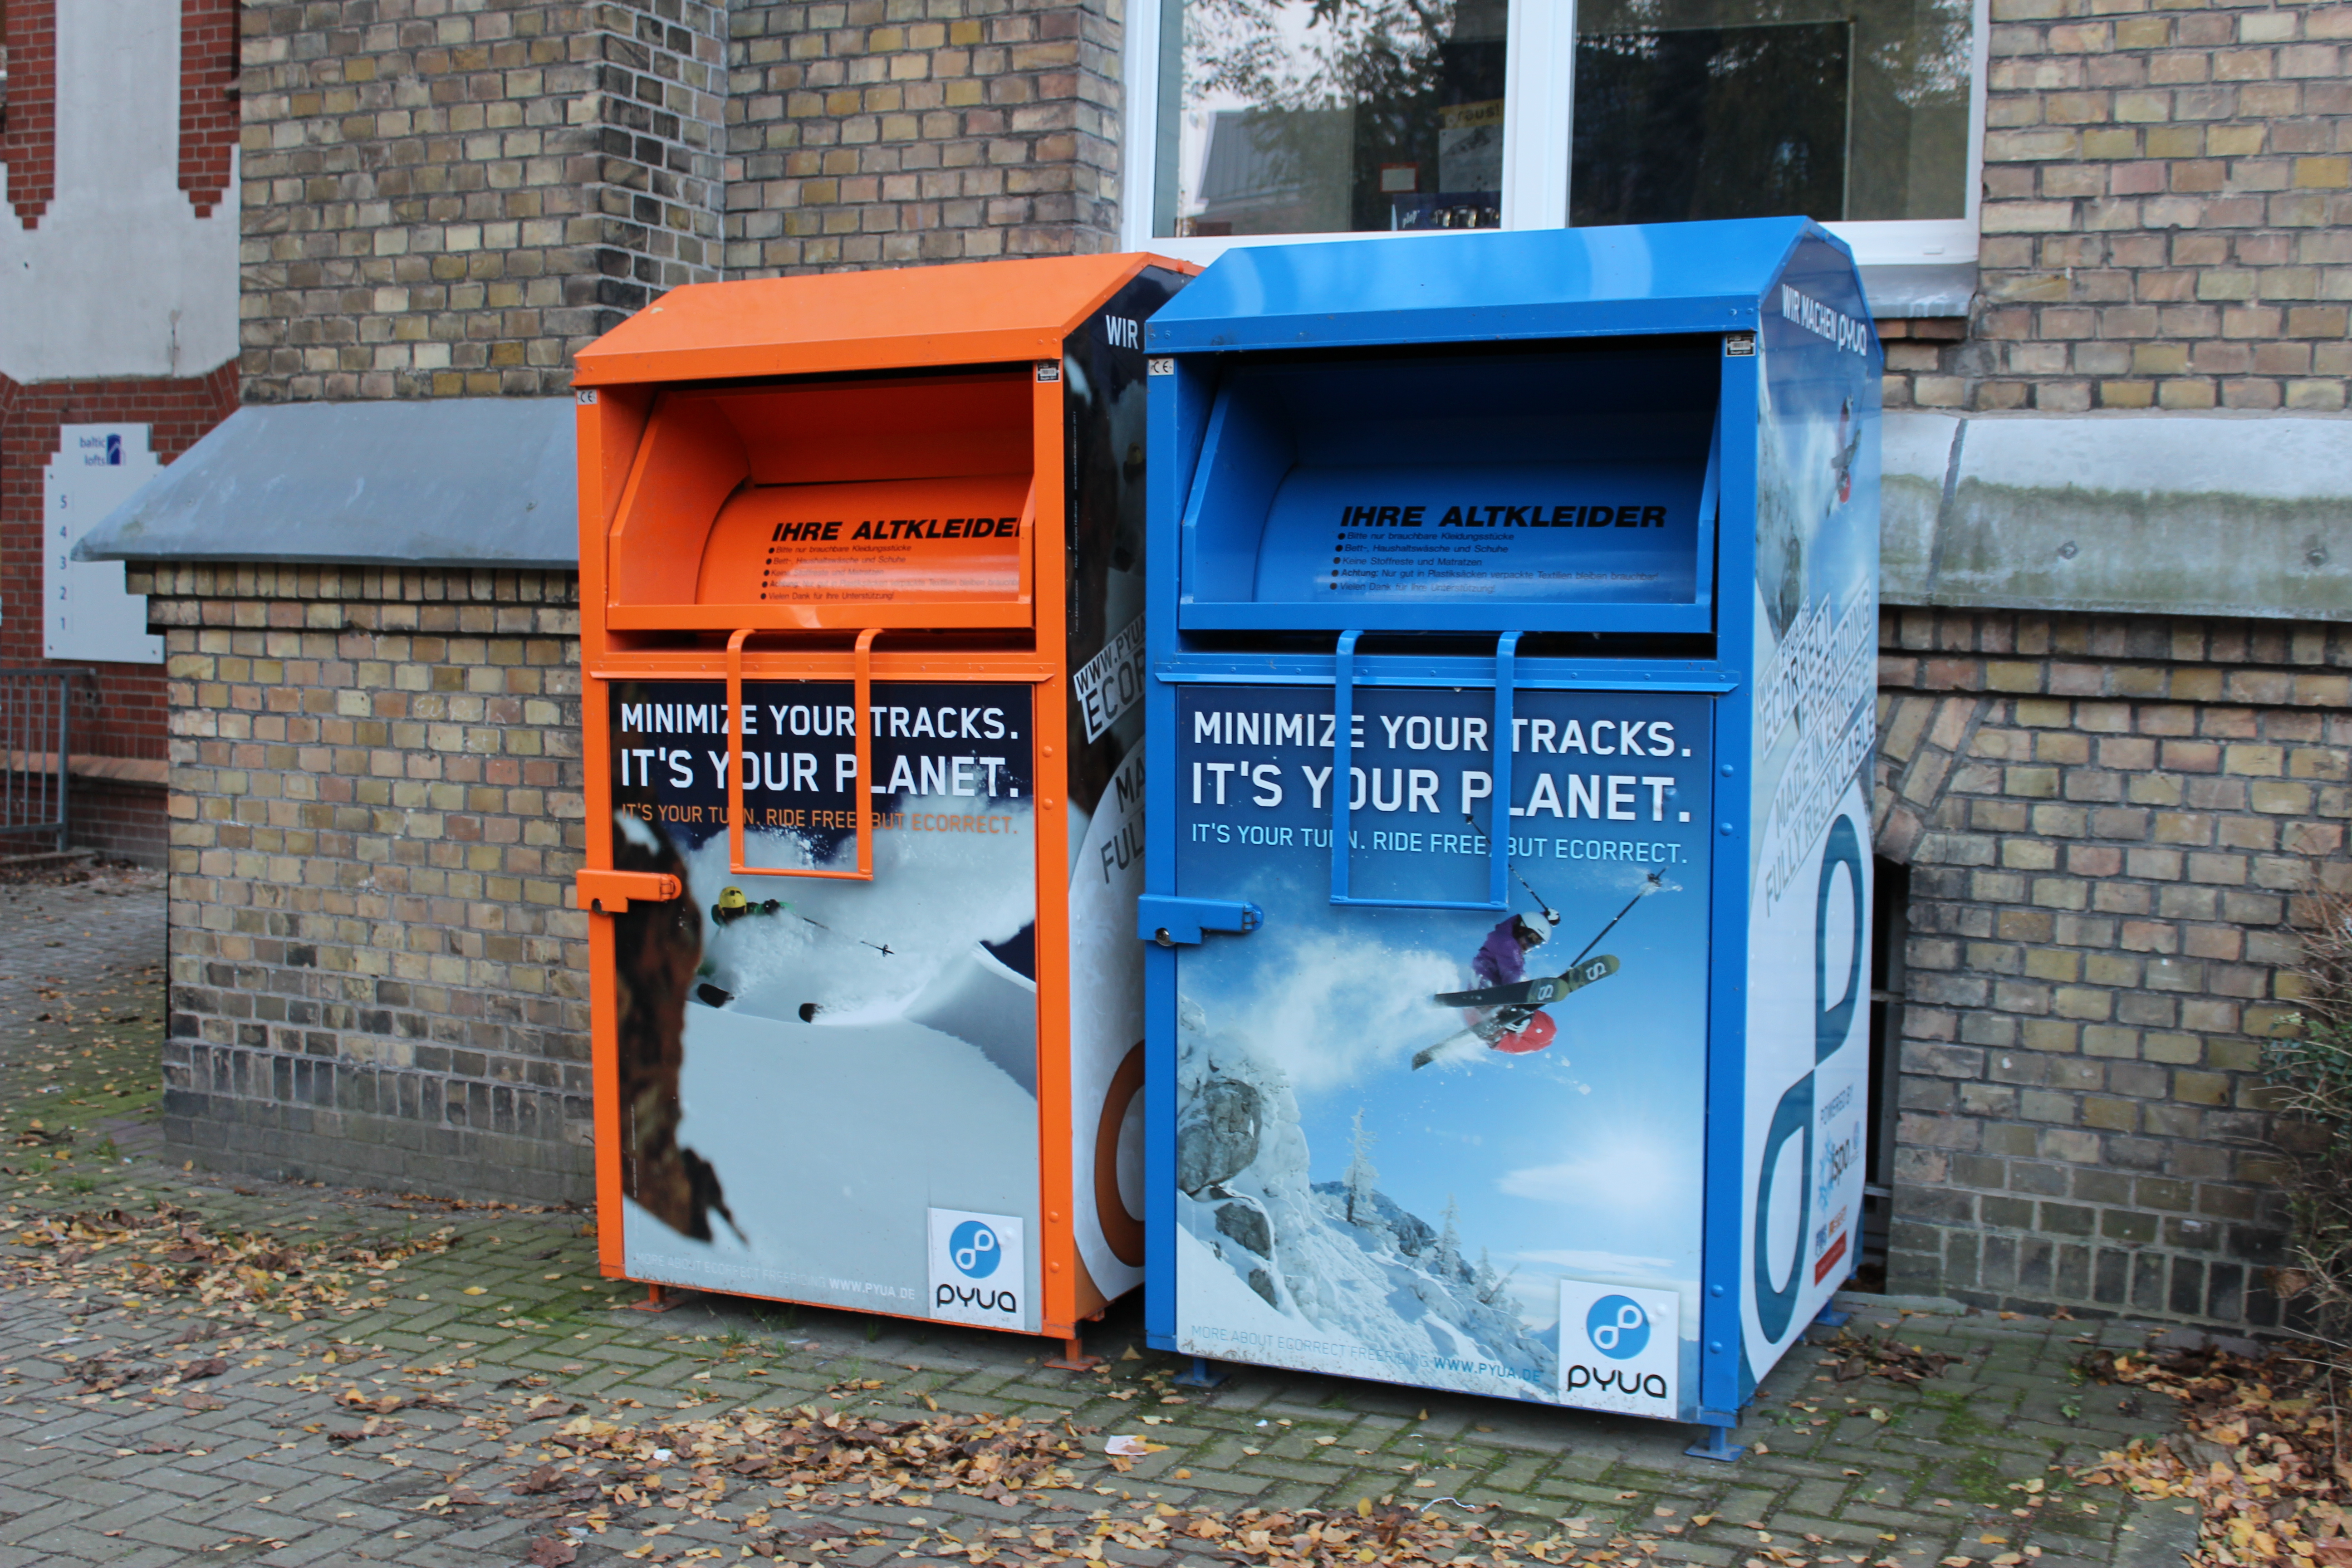 10-pyua_recycling_container - Recycling in der Outdoorbranche